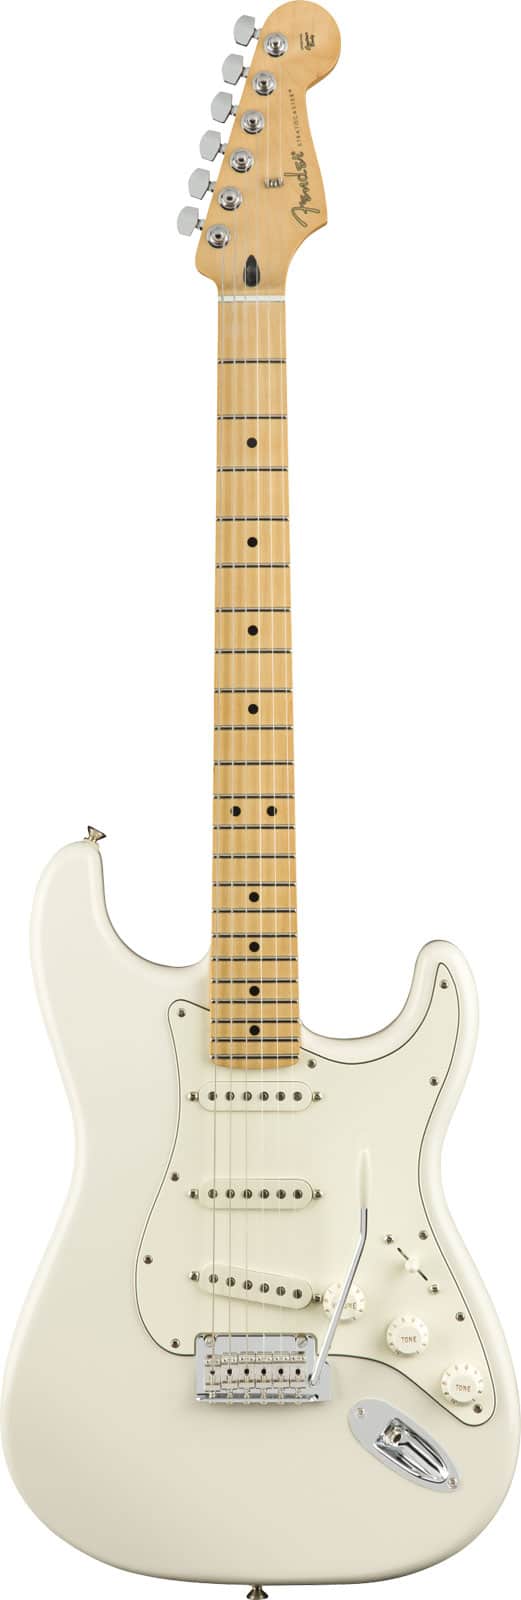 FENDER MEXICAN PLAYER STRATOCASTER MN, POLAR WHITE - REFURBISHED